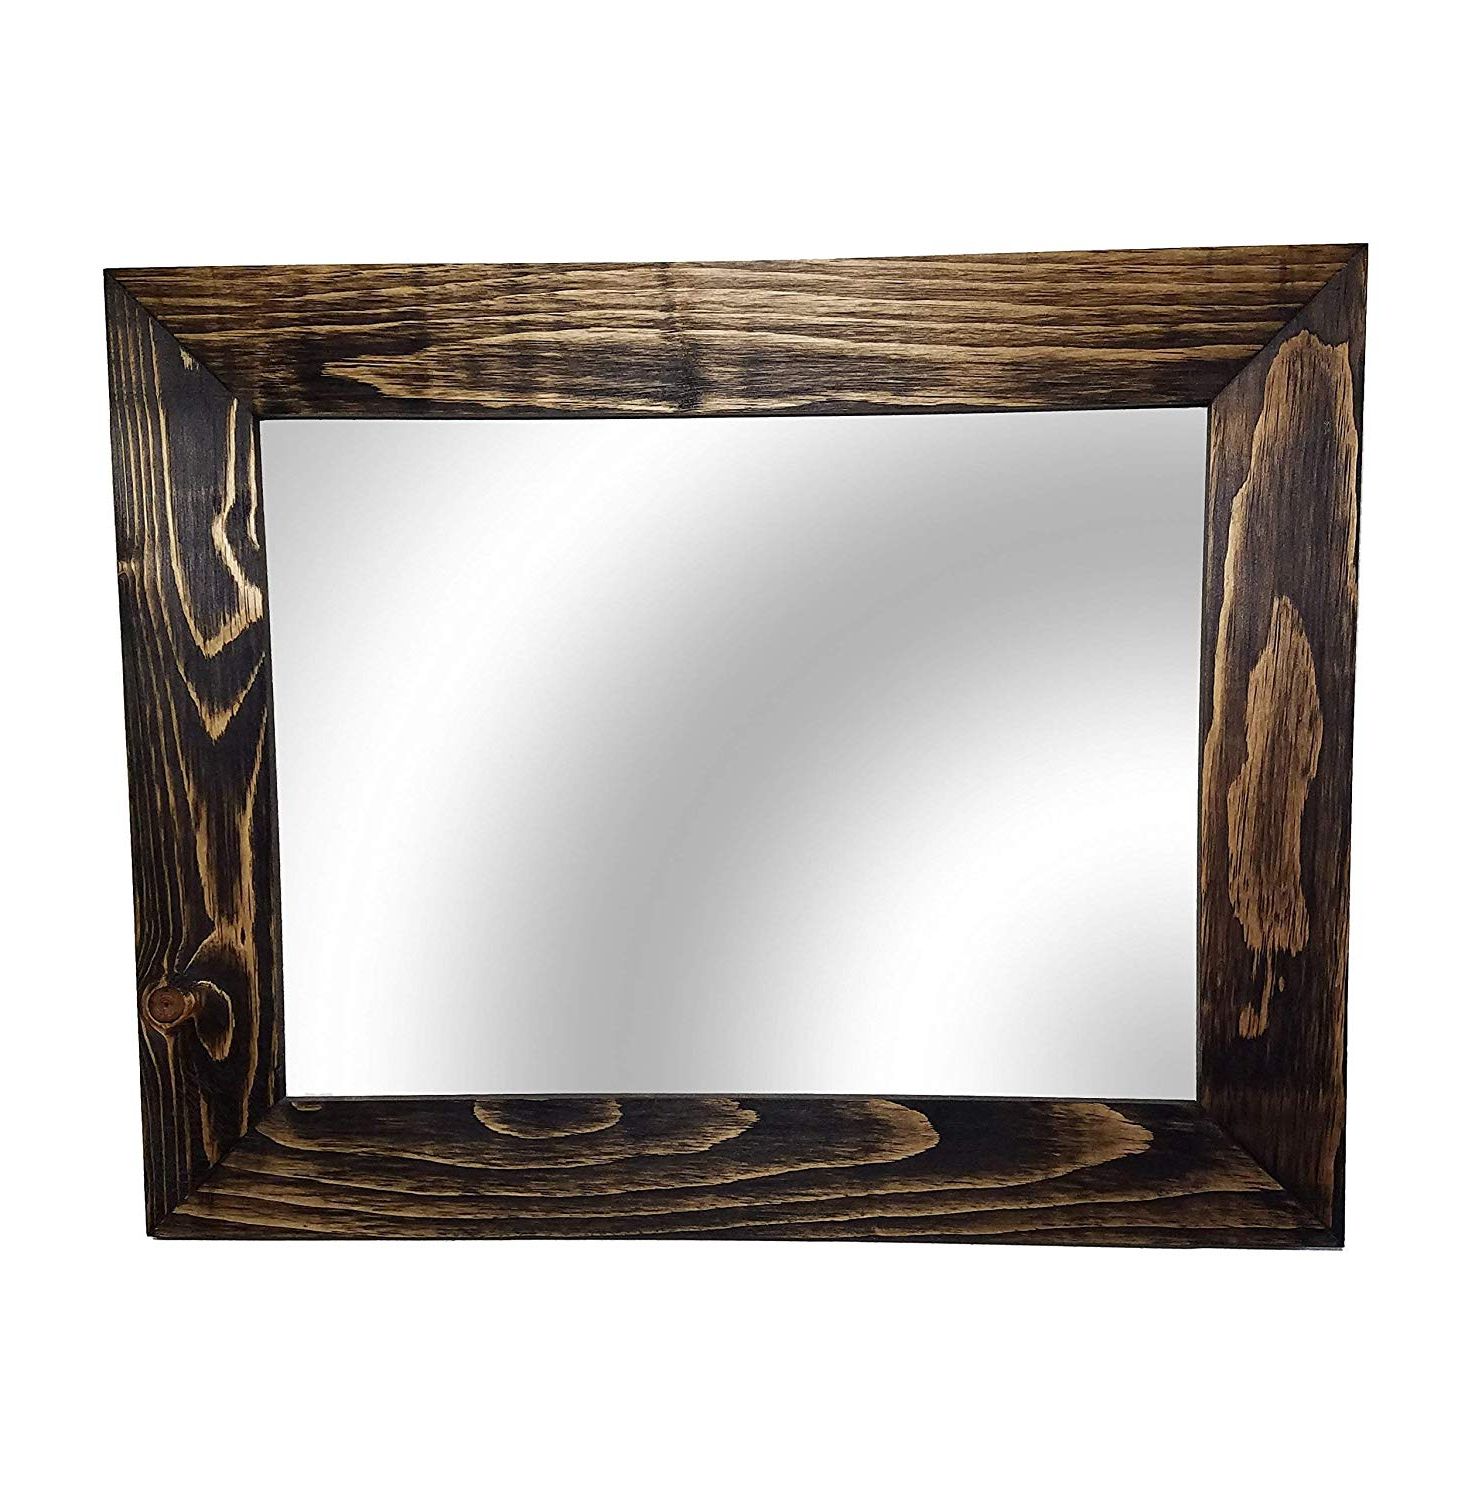 Fashionable Shiplap Large Wood Framed Mirror Available In 4 Sizes And 20 Colors: Shown  In Dark Walnut Stain – Large Wall Mirror – Rustic Barnwood Style – Intended For Wooden Framed Wall Mirrors (View 14 of 20)